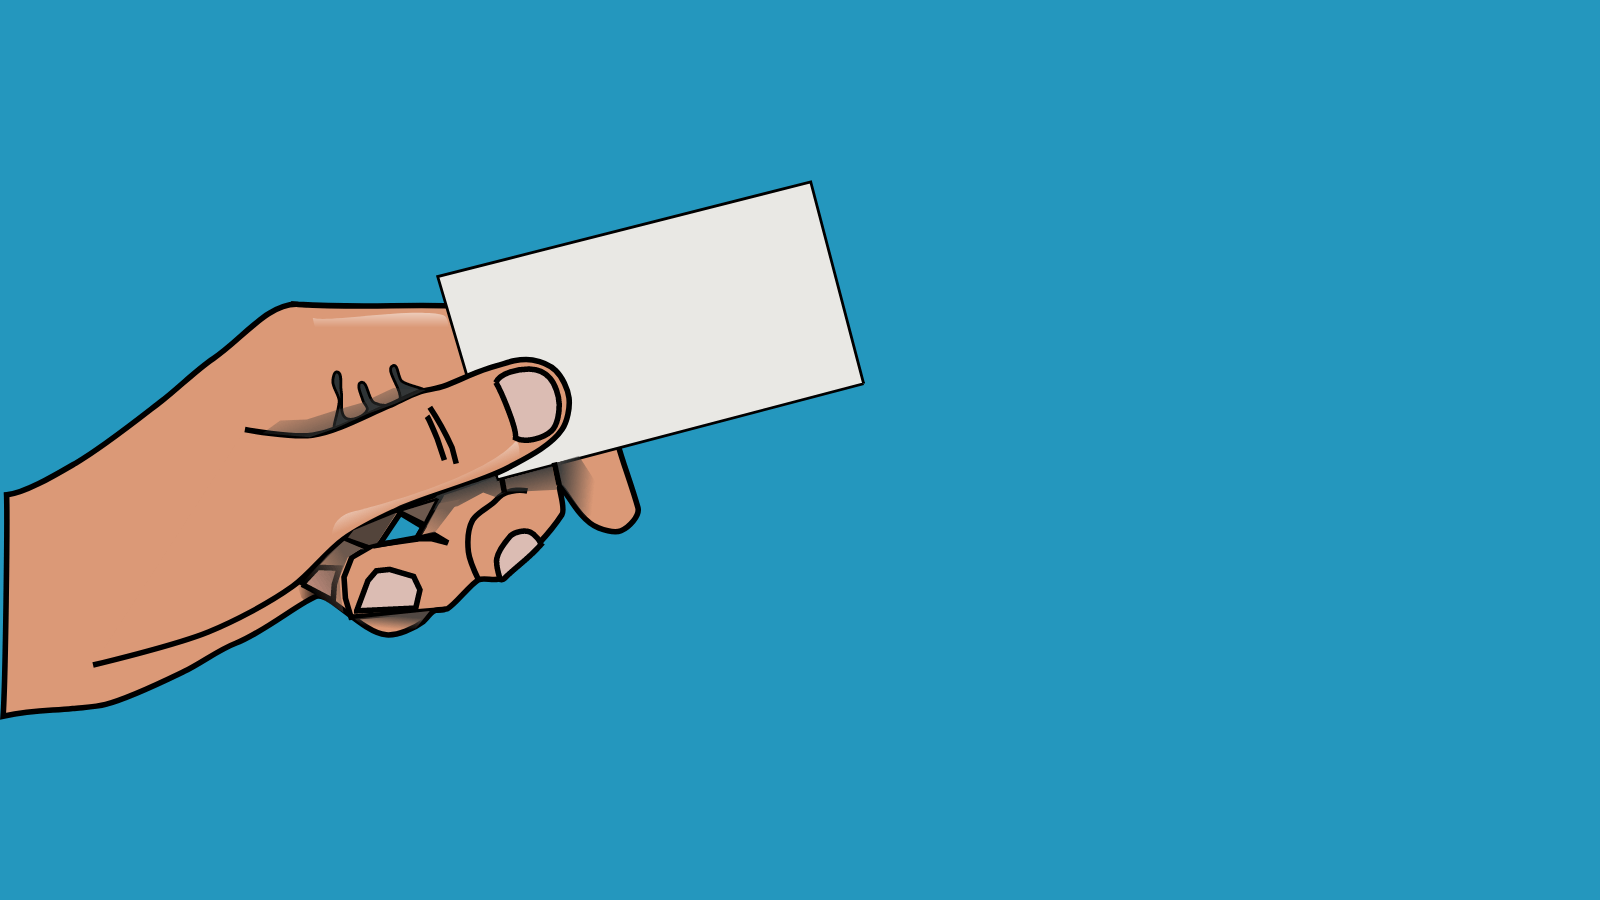 A hand holding a business card